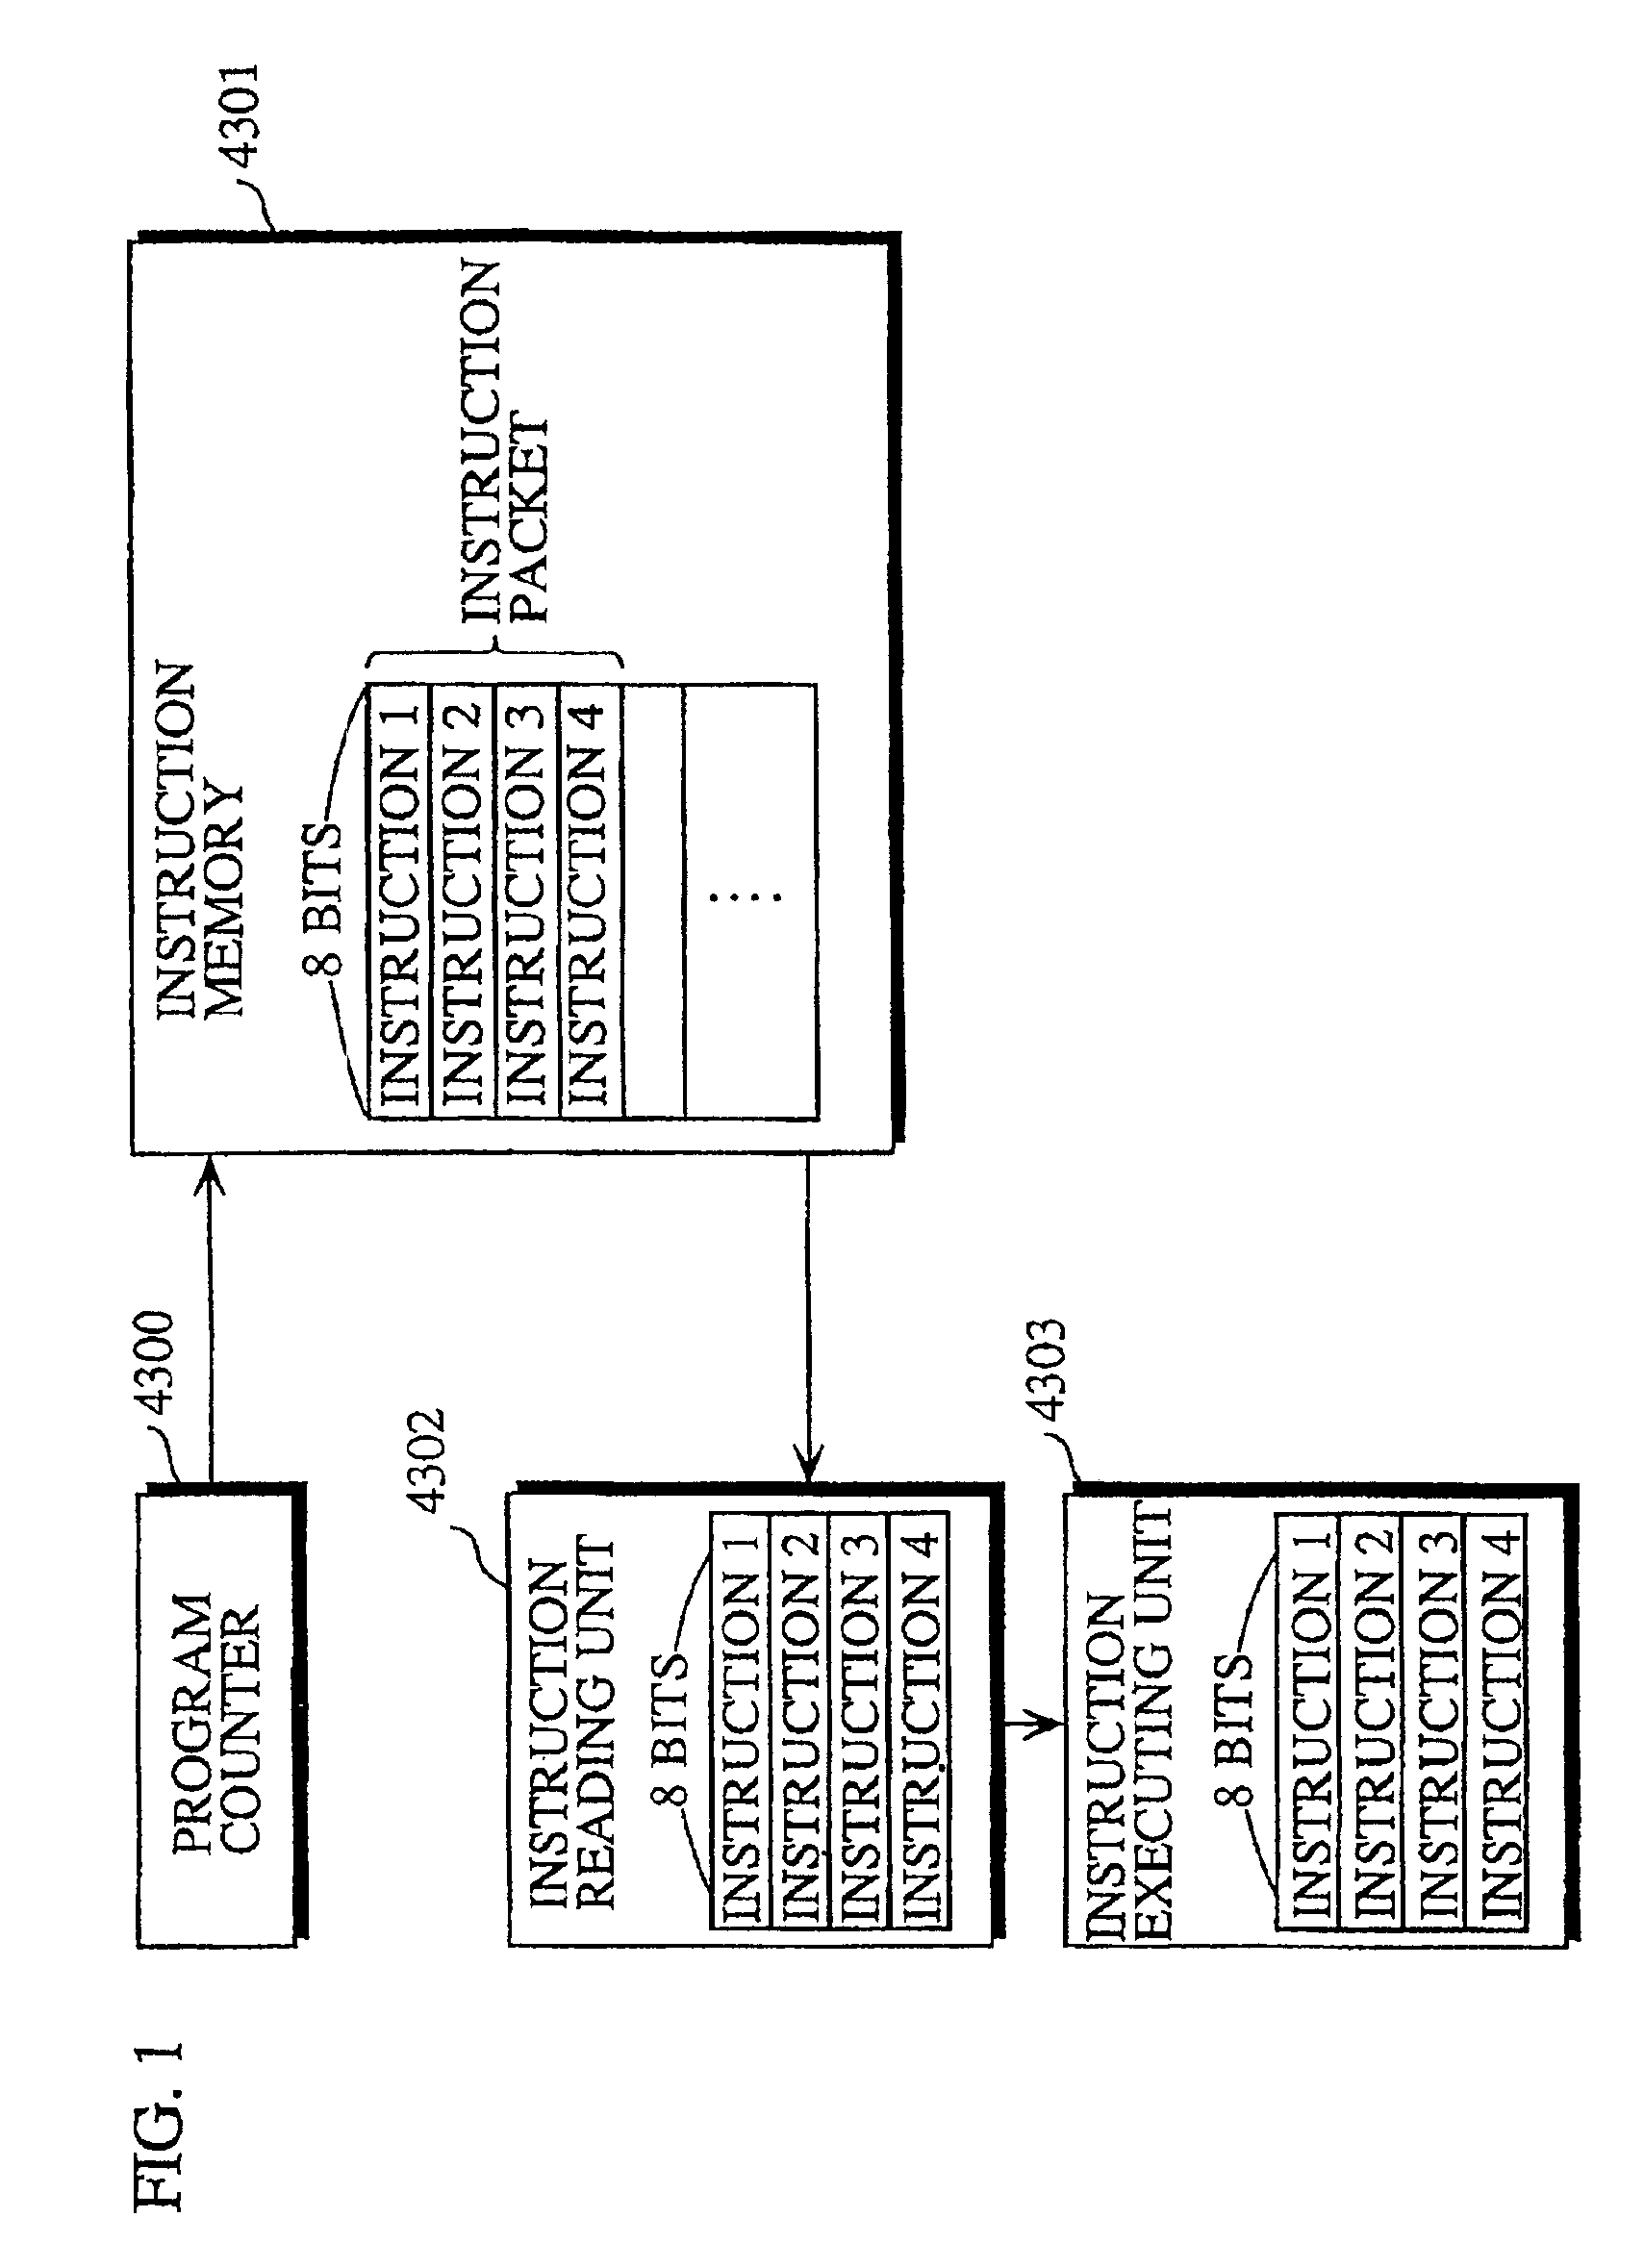 Processor for executing instructions in units that are unrelated to the units in which instructions are read, and a compiler, an optimization apparatus, an assembler, a linker, a debugger and a disassembler for such processor